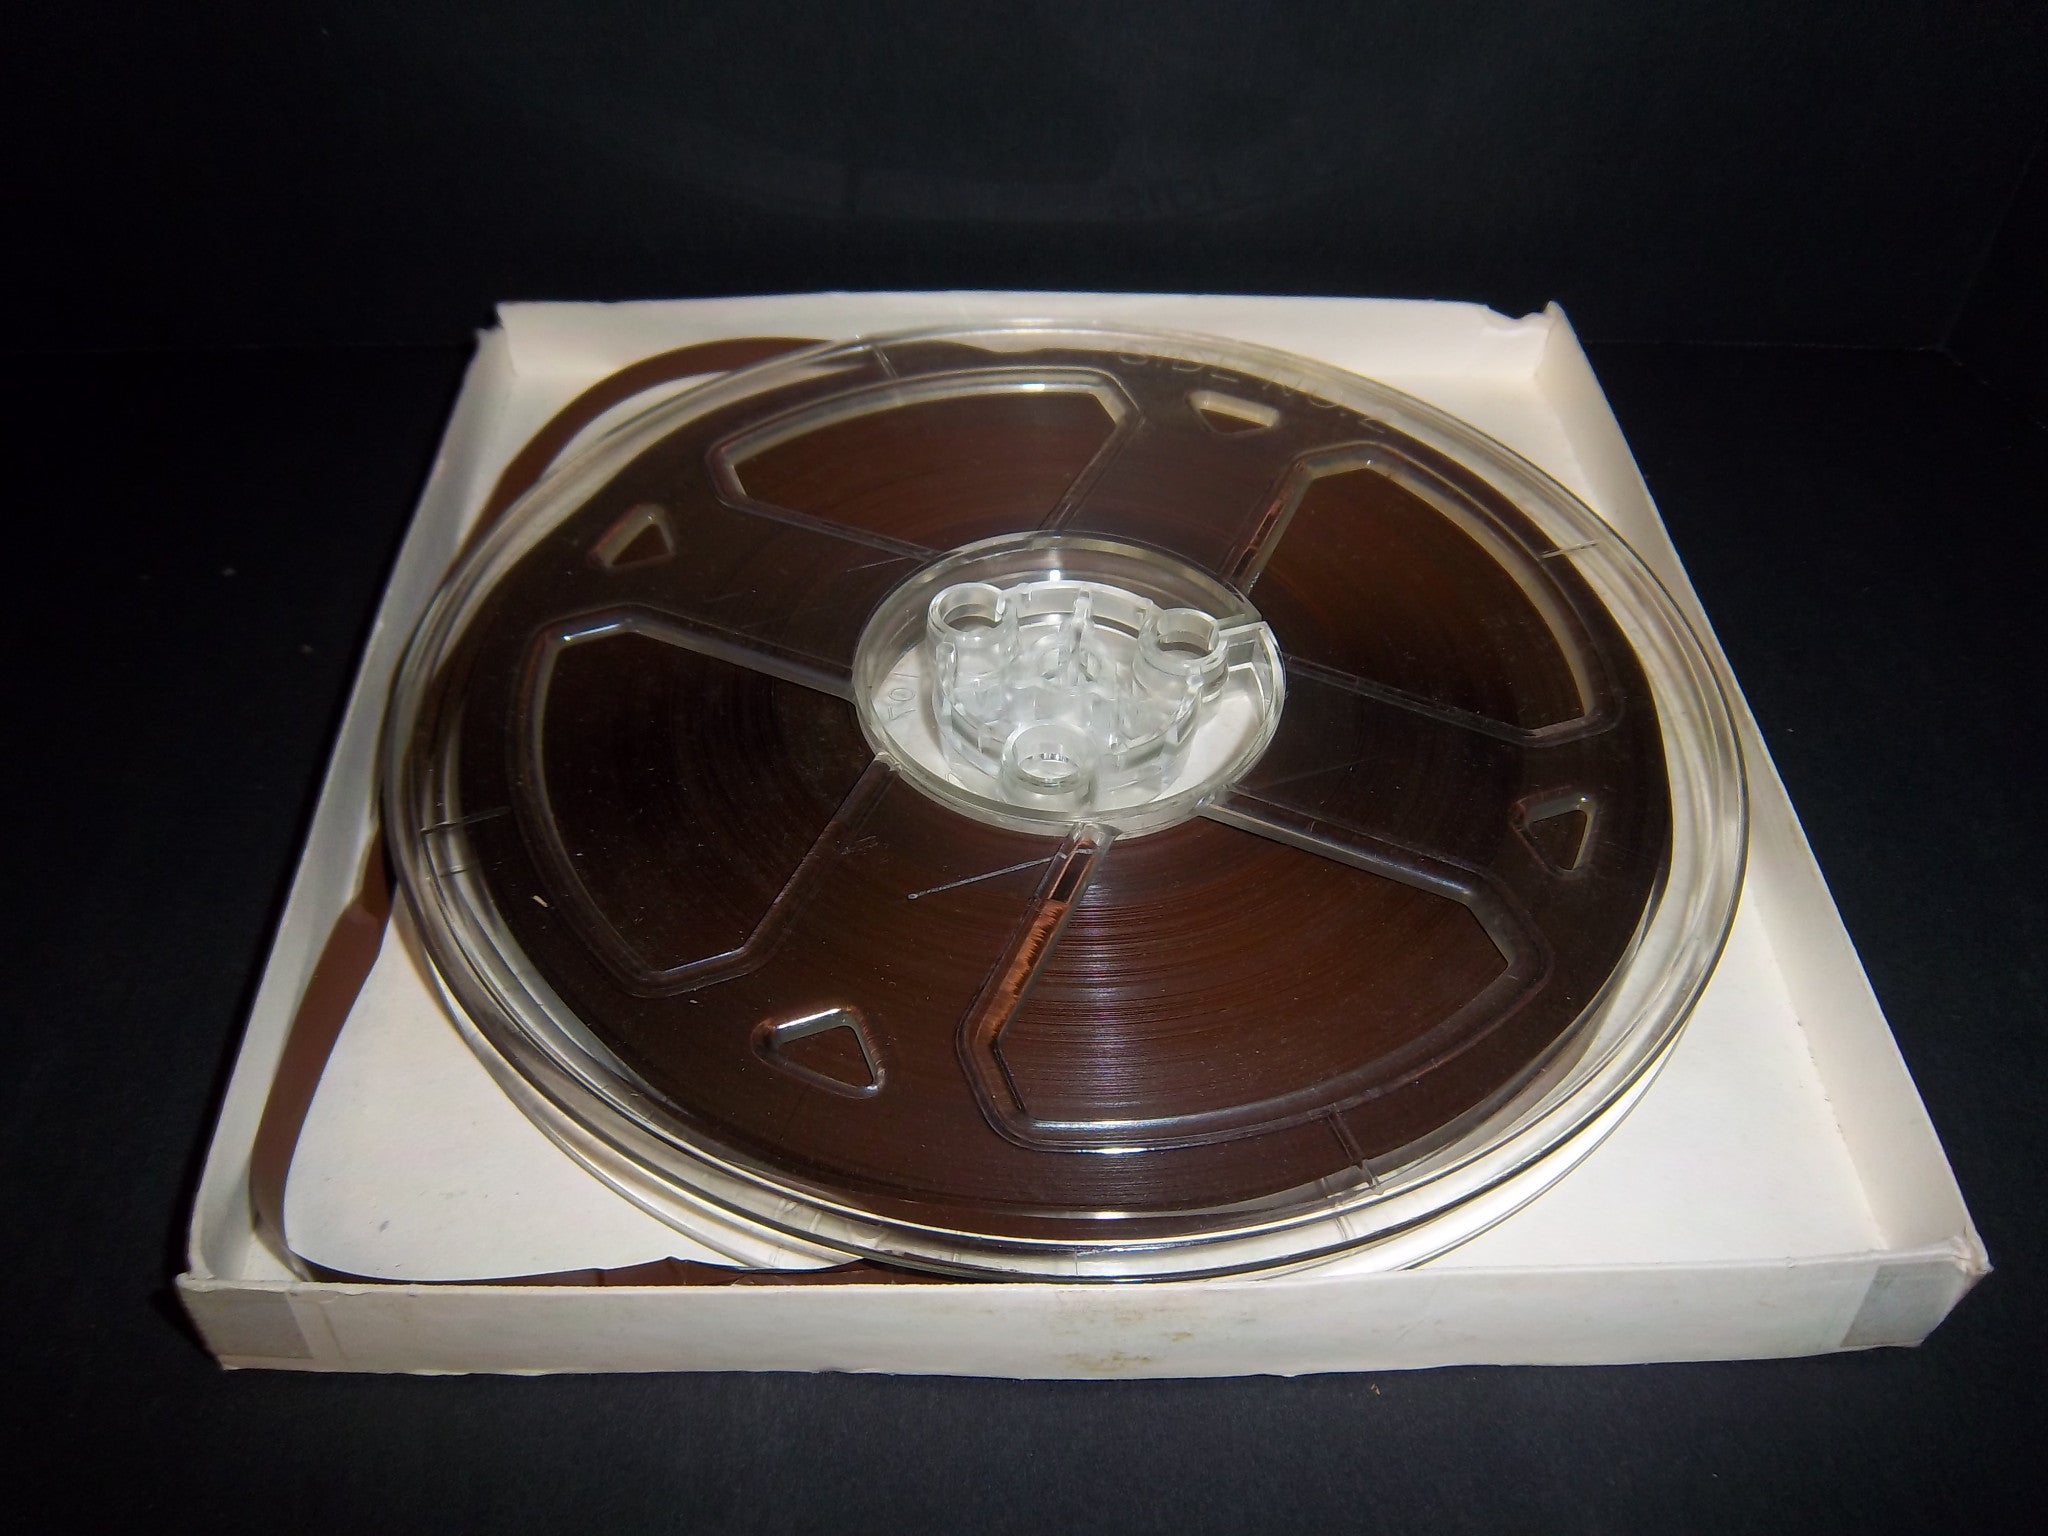 Concert 90 Magnetic Reel to Reel Recording Tape 4-Track 1200 ft. 1